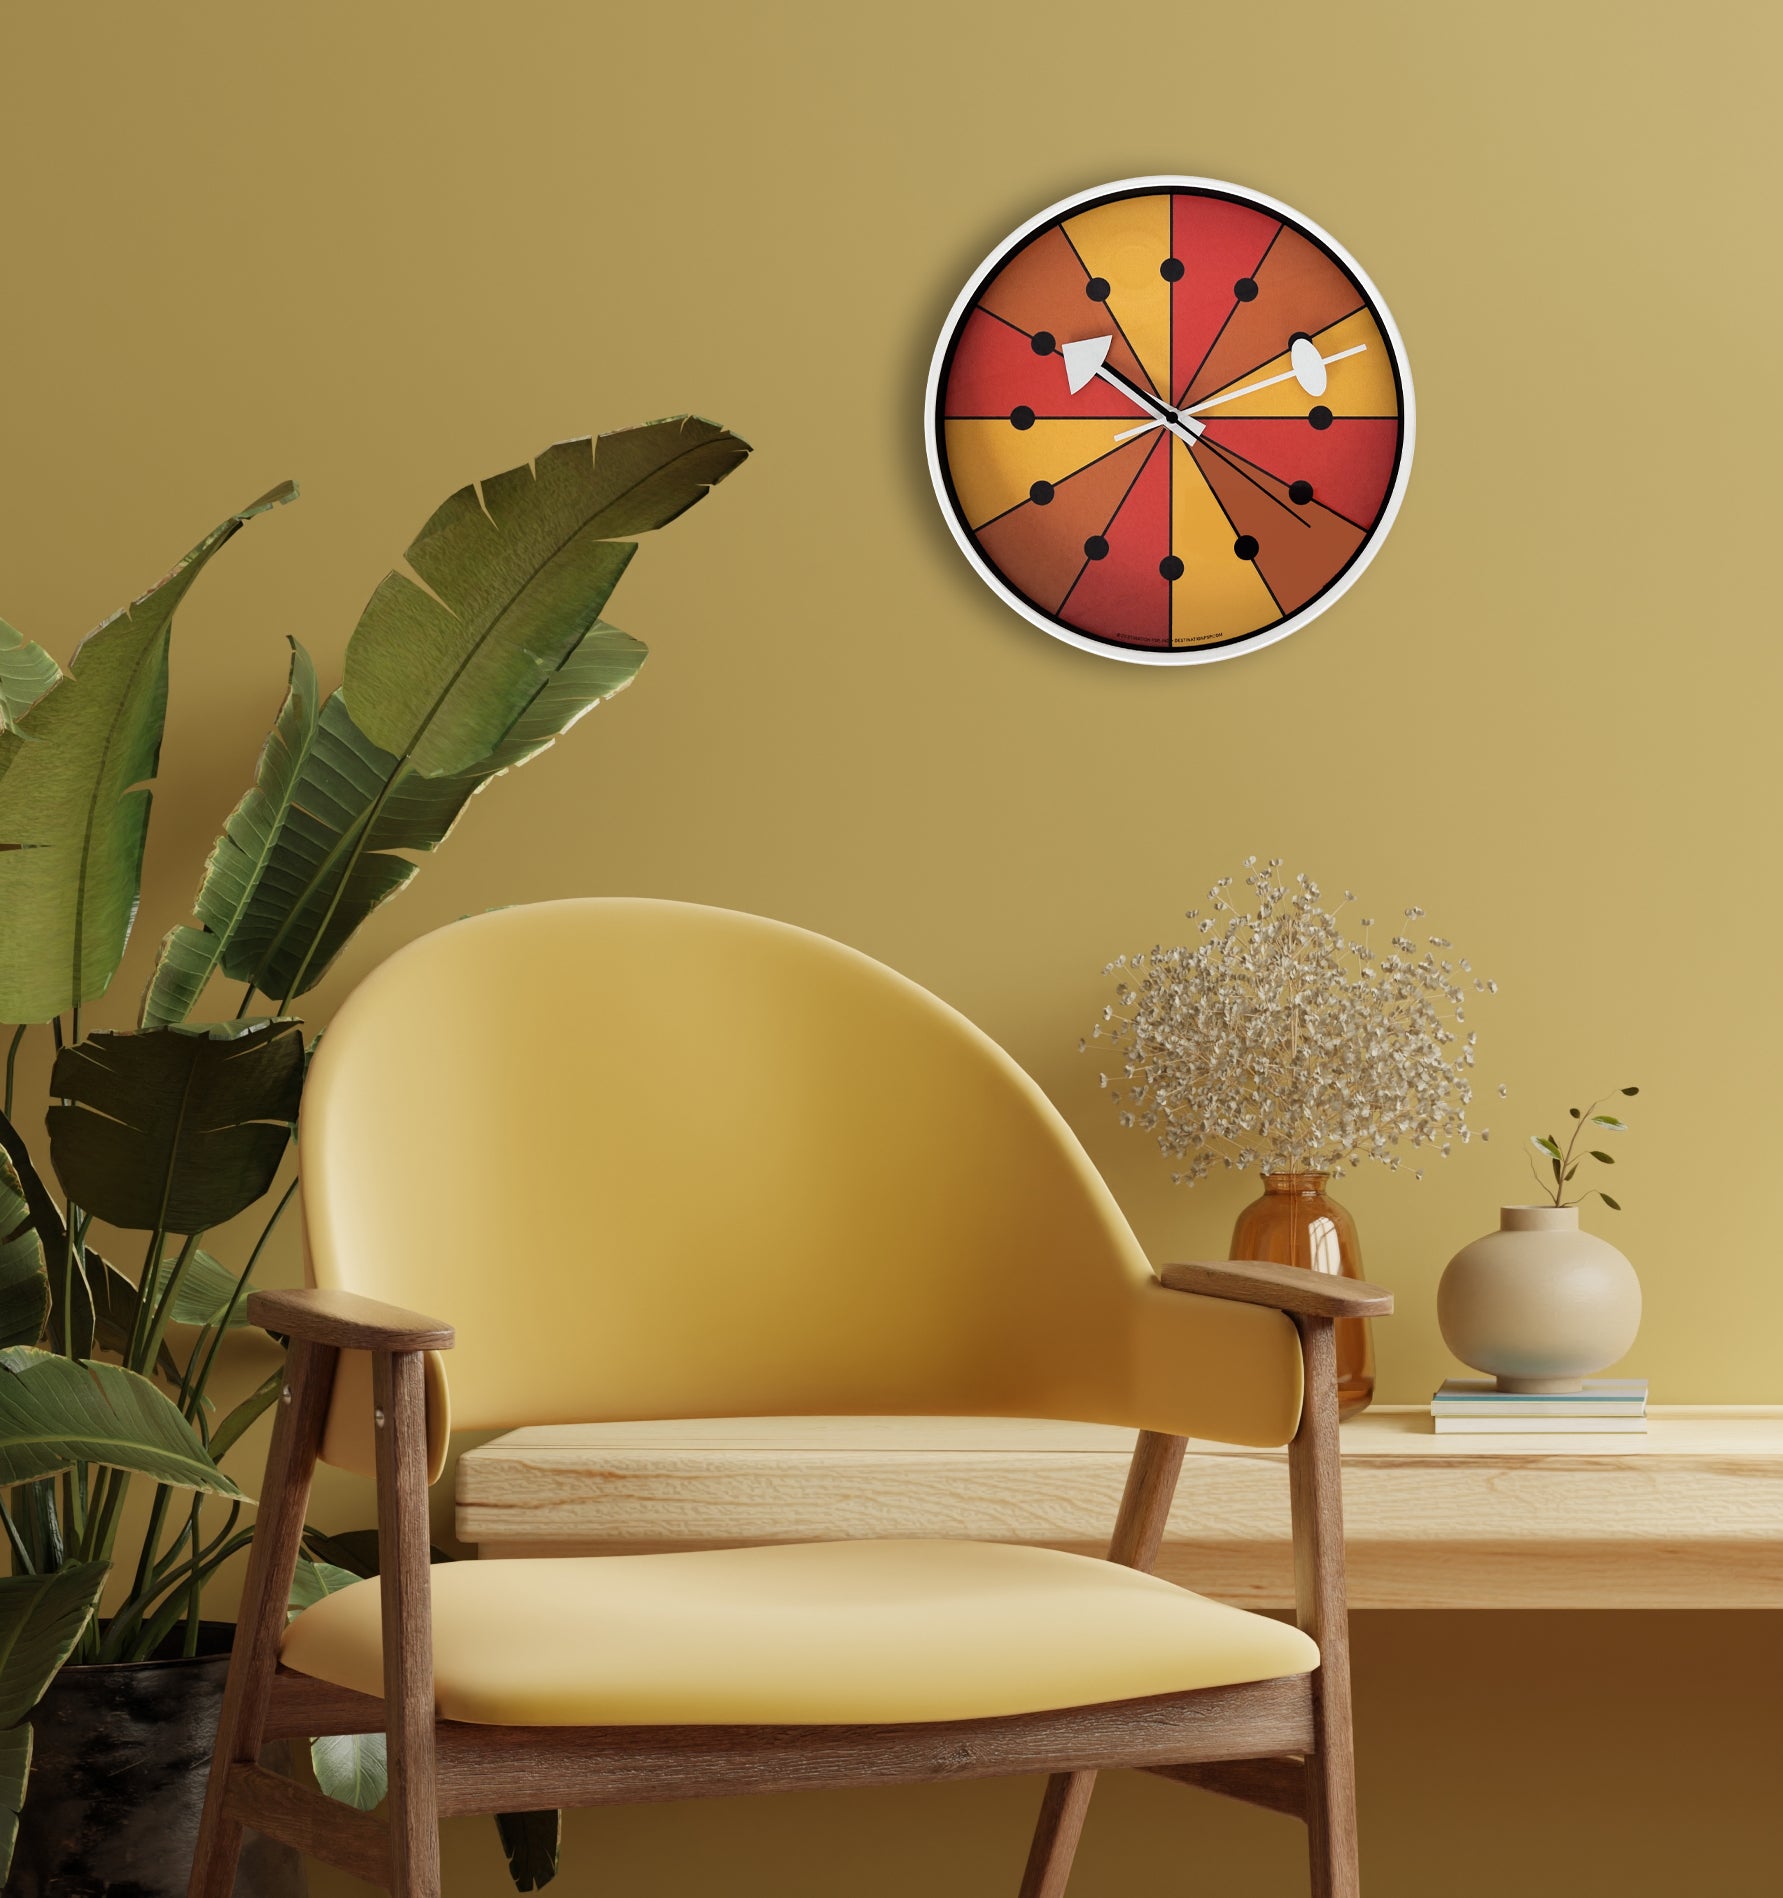 mod orange yellow and red wall clock with white hands and rim hanging on green wall with yellow midcentury chair